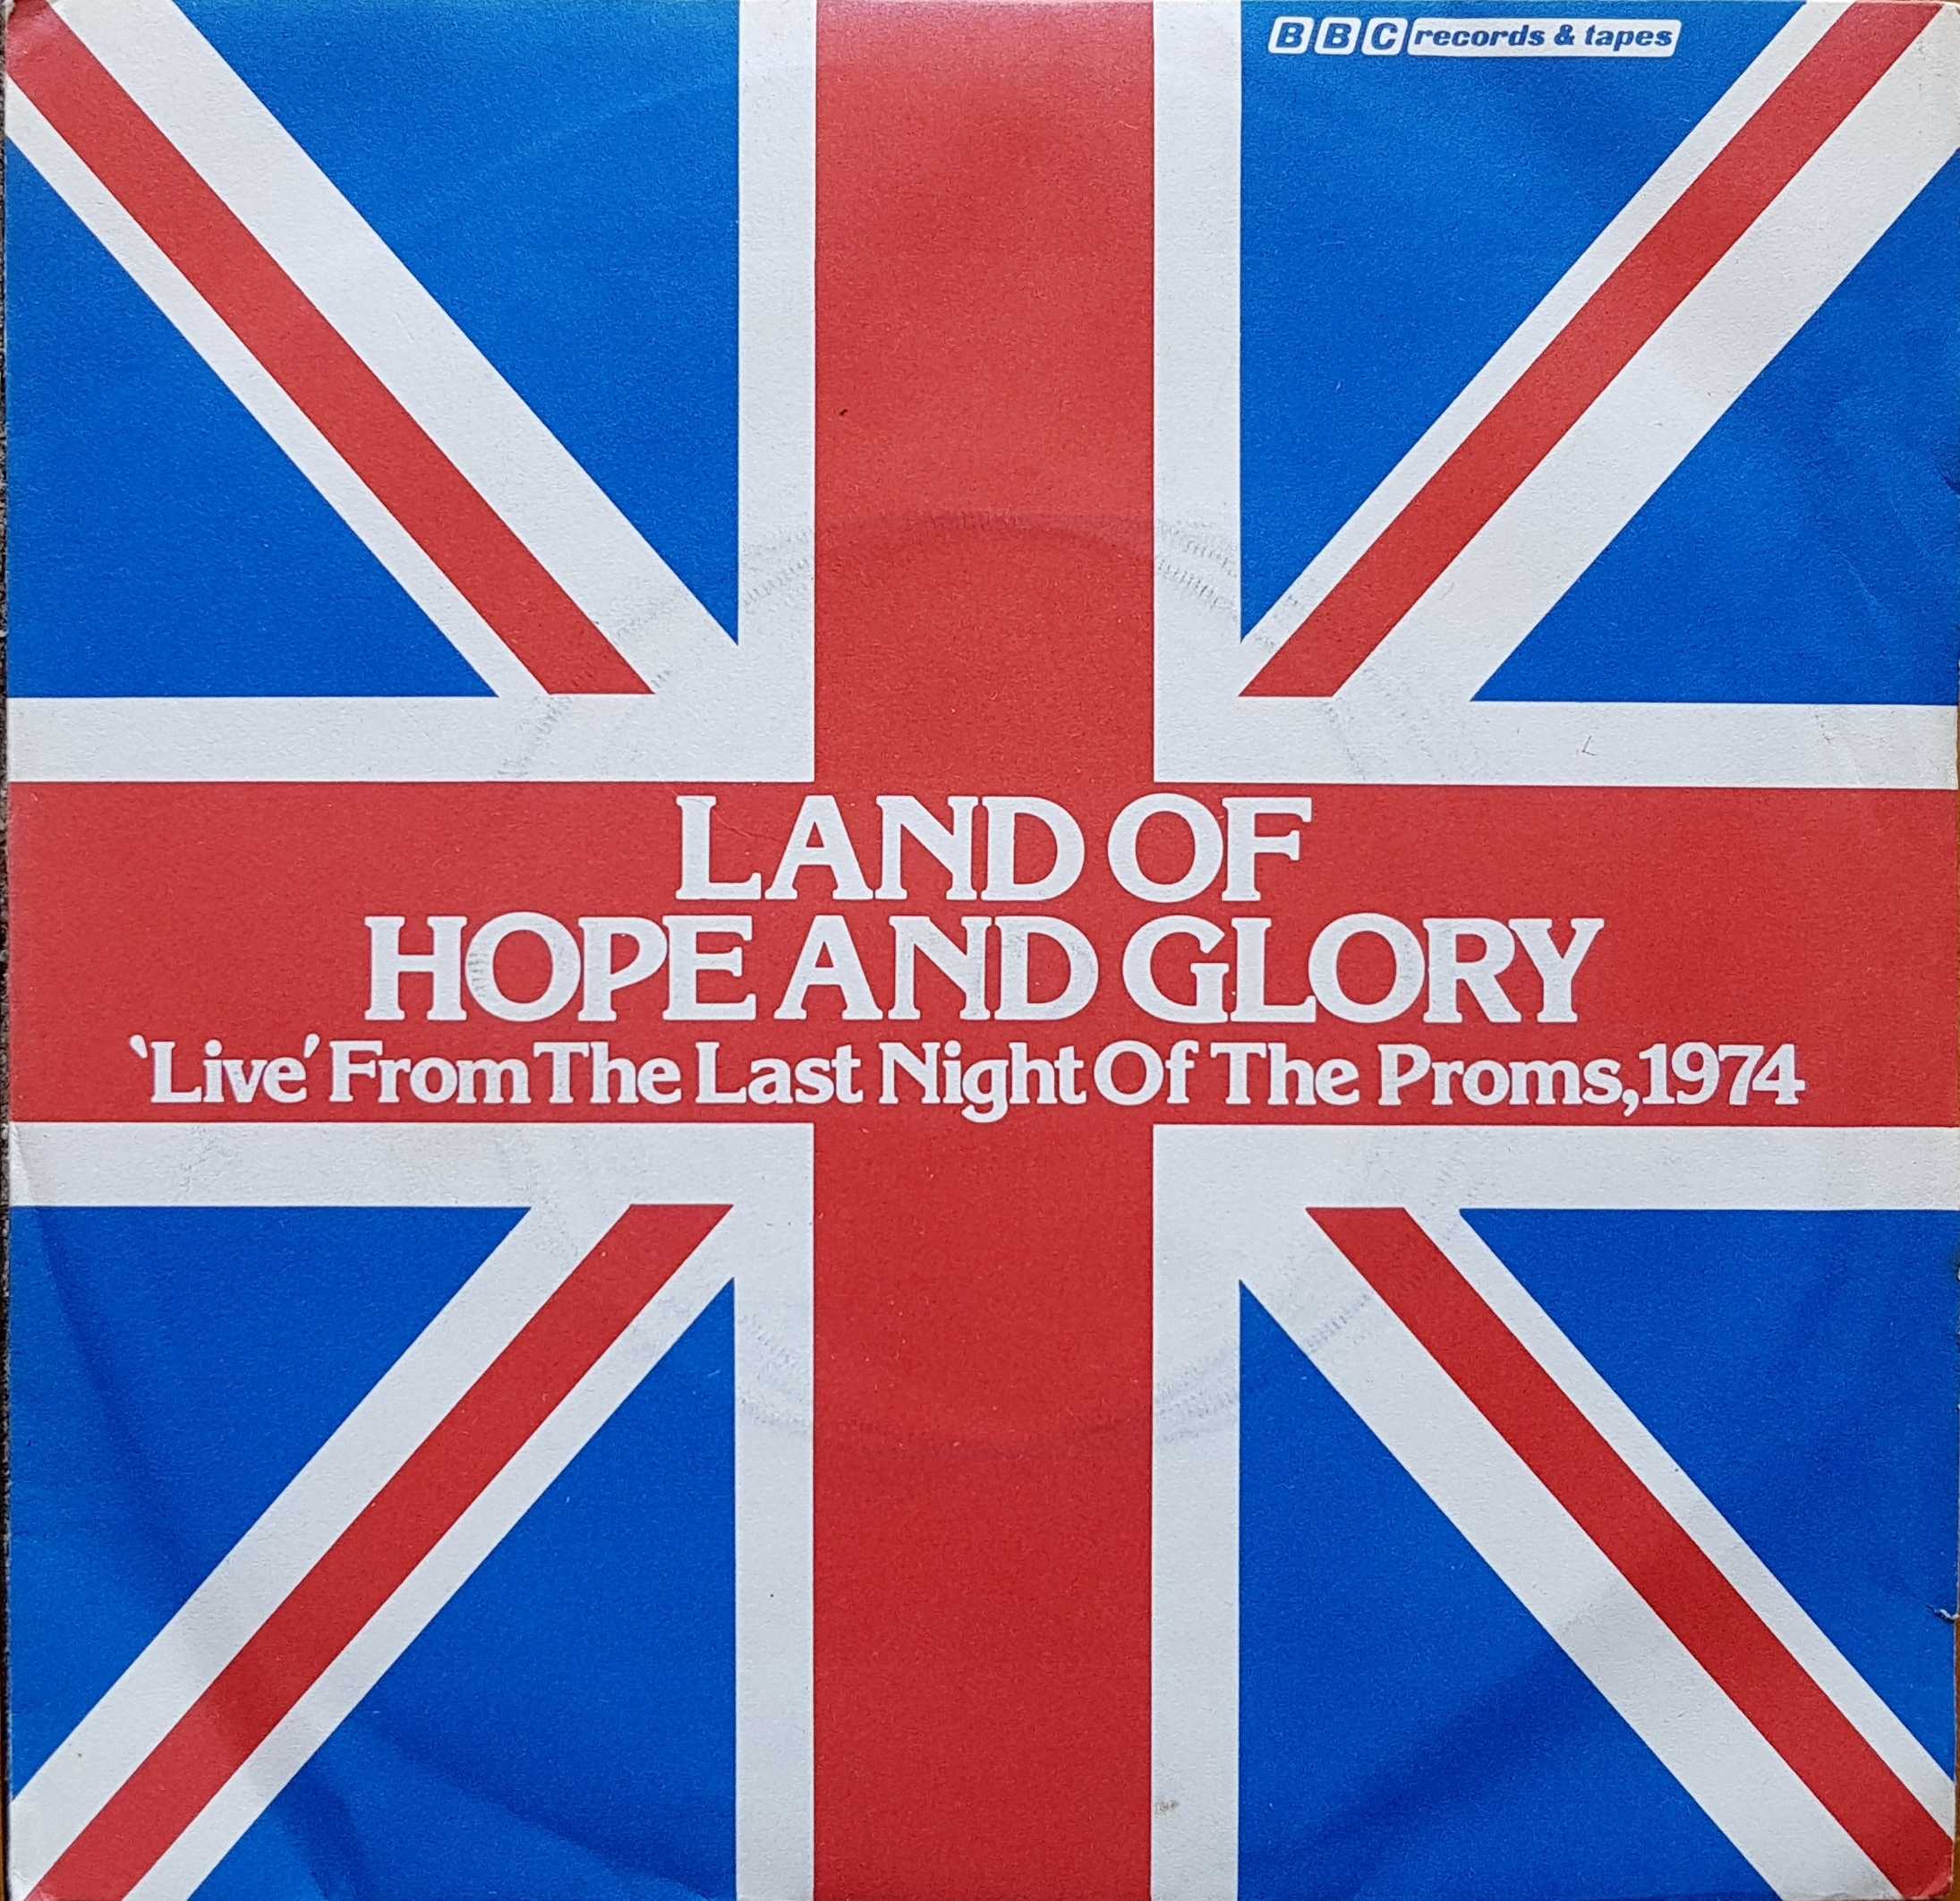 Picture of RESL 48 Land of hope and glory by artist Sir Edward Elgar from the BBC singles - Records and Tapes library